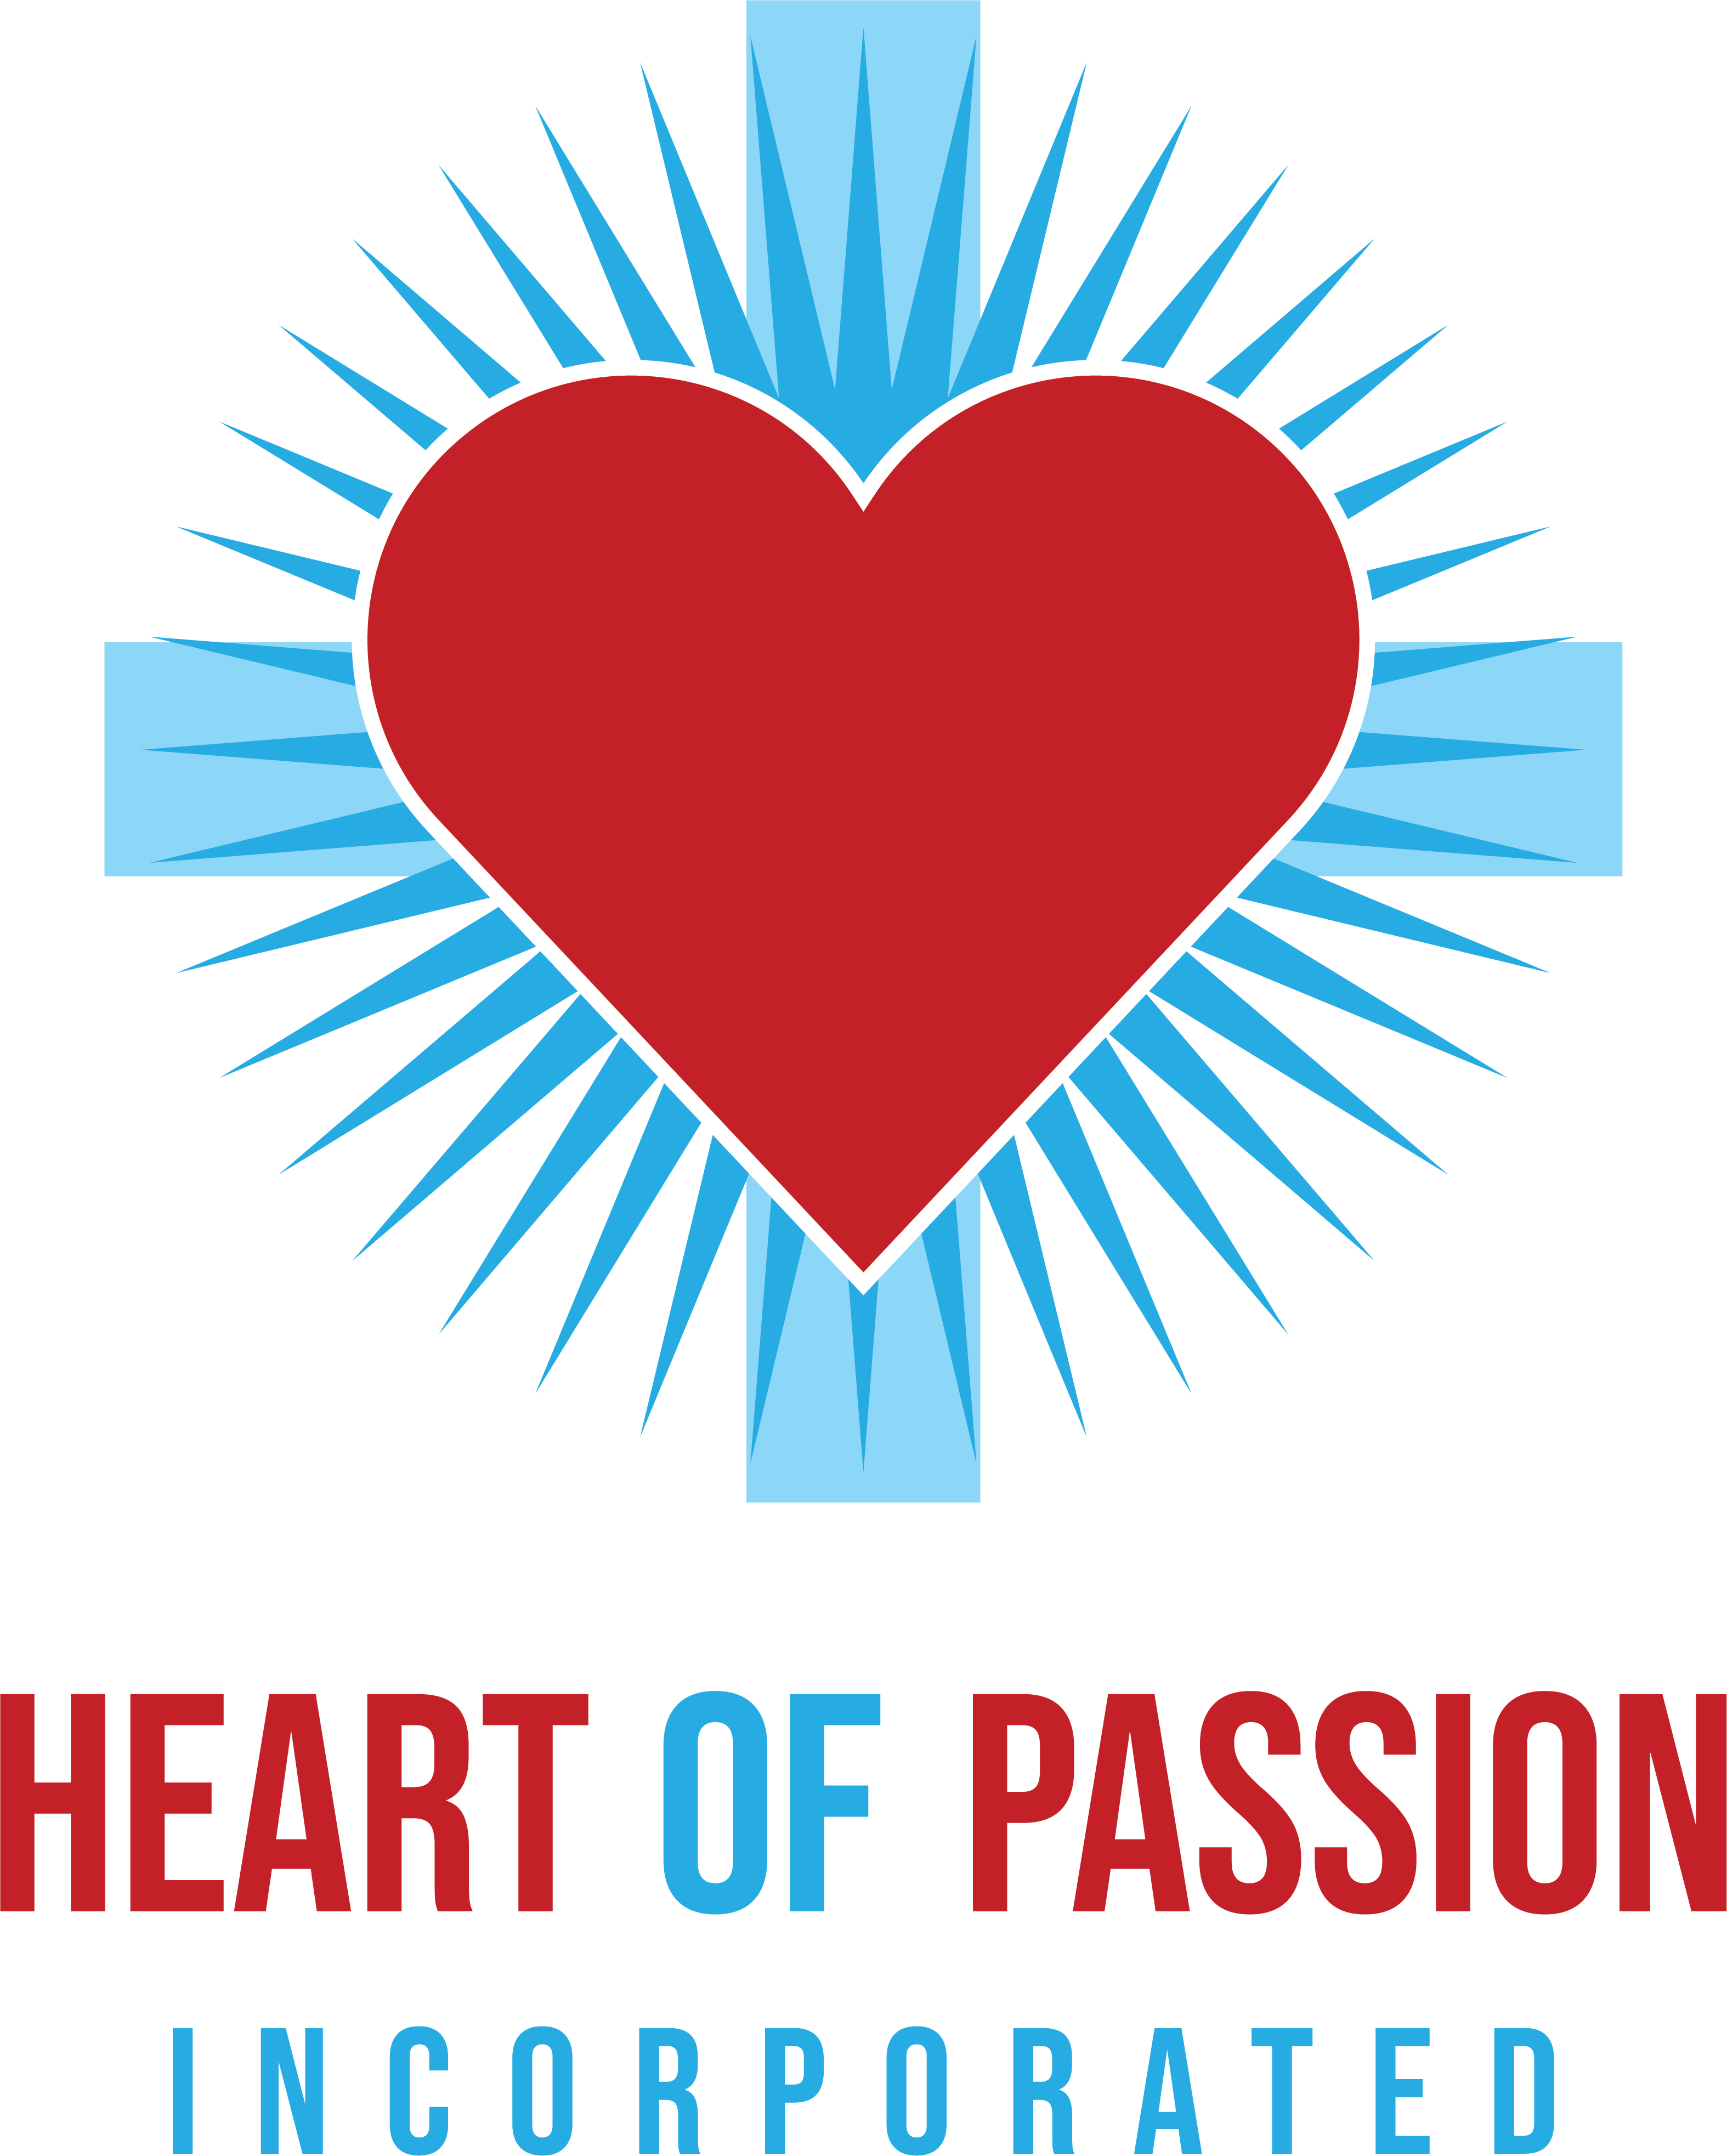 Heart of Passion